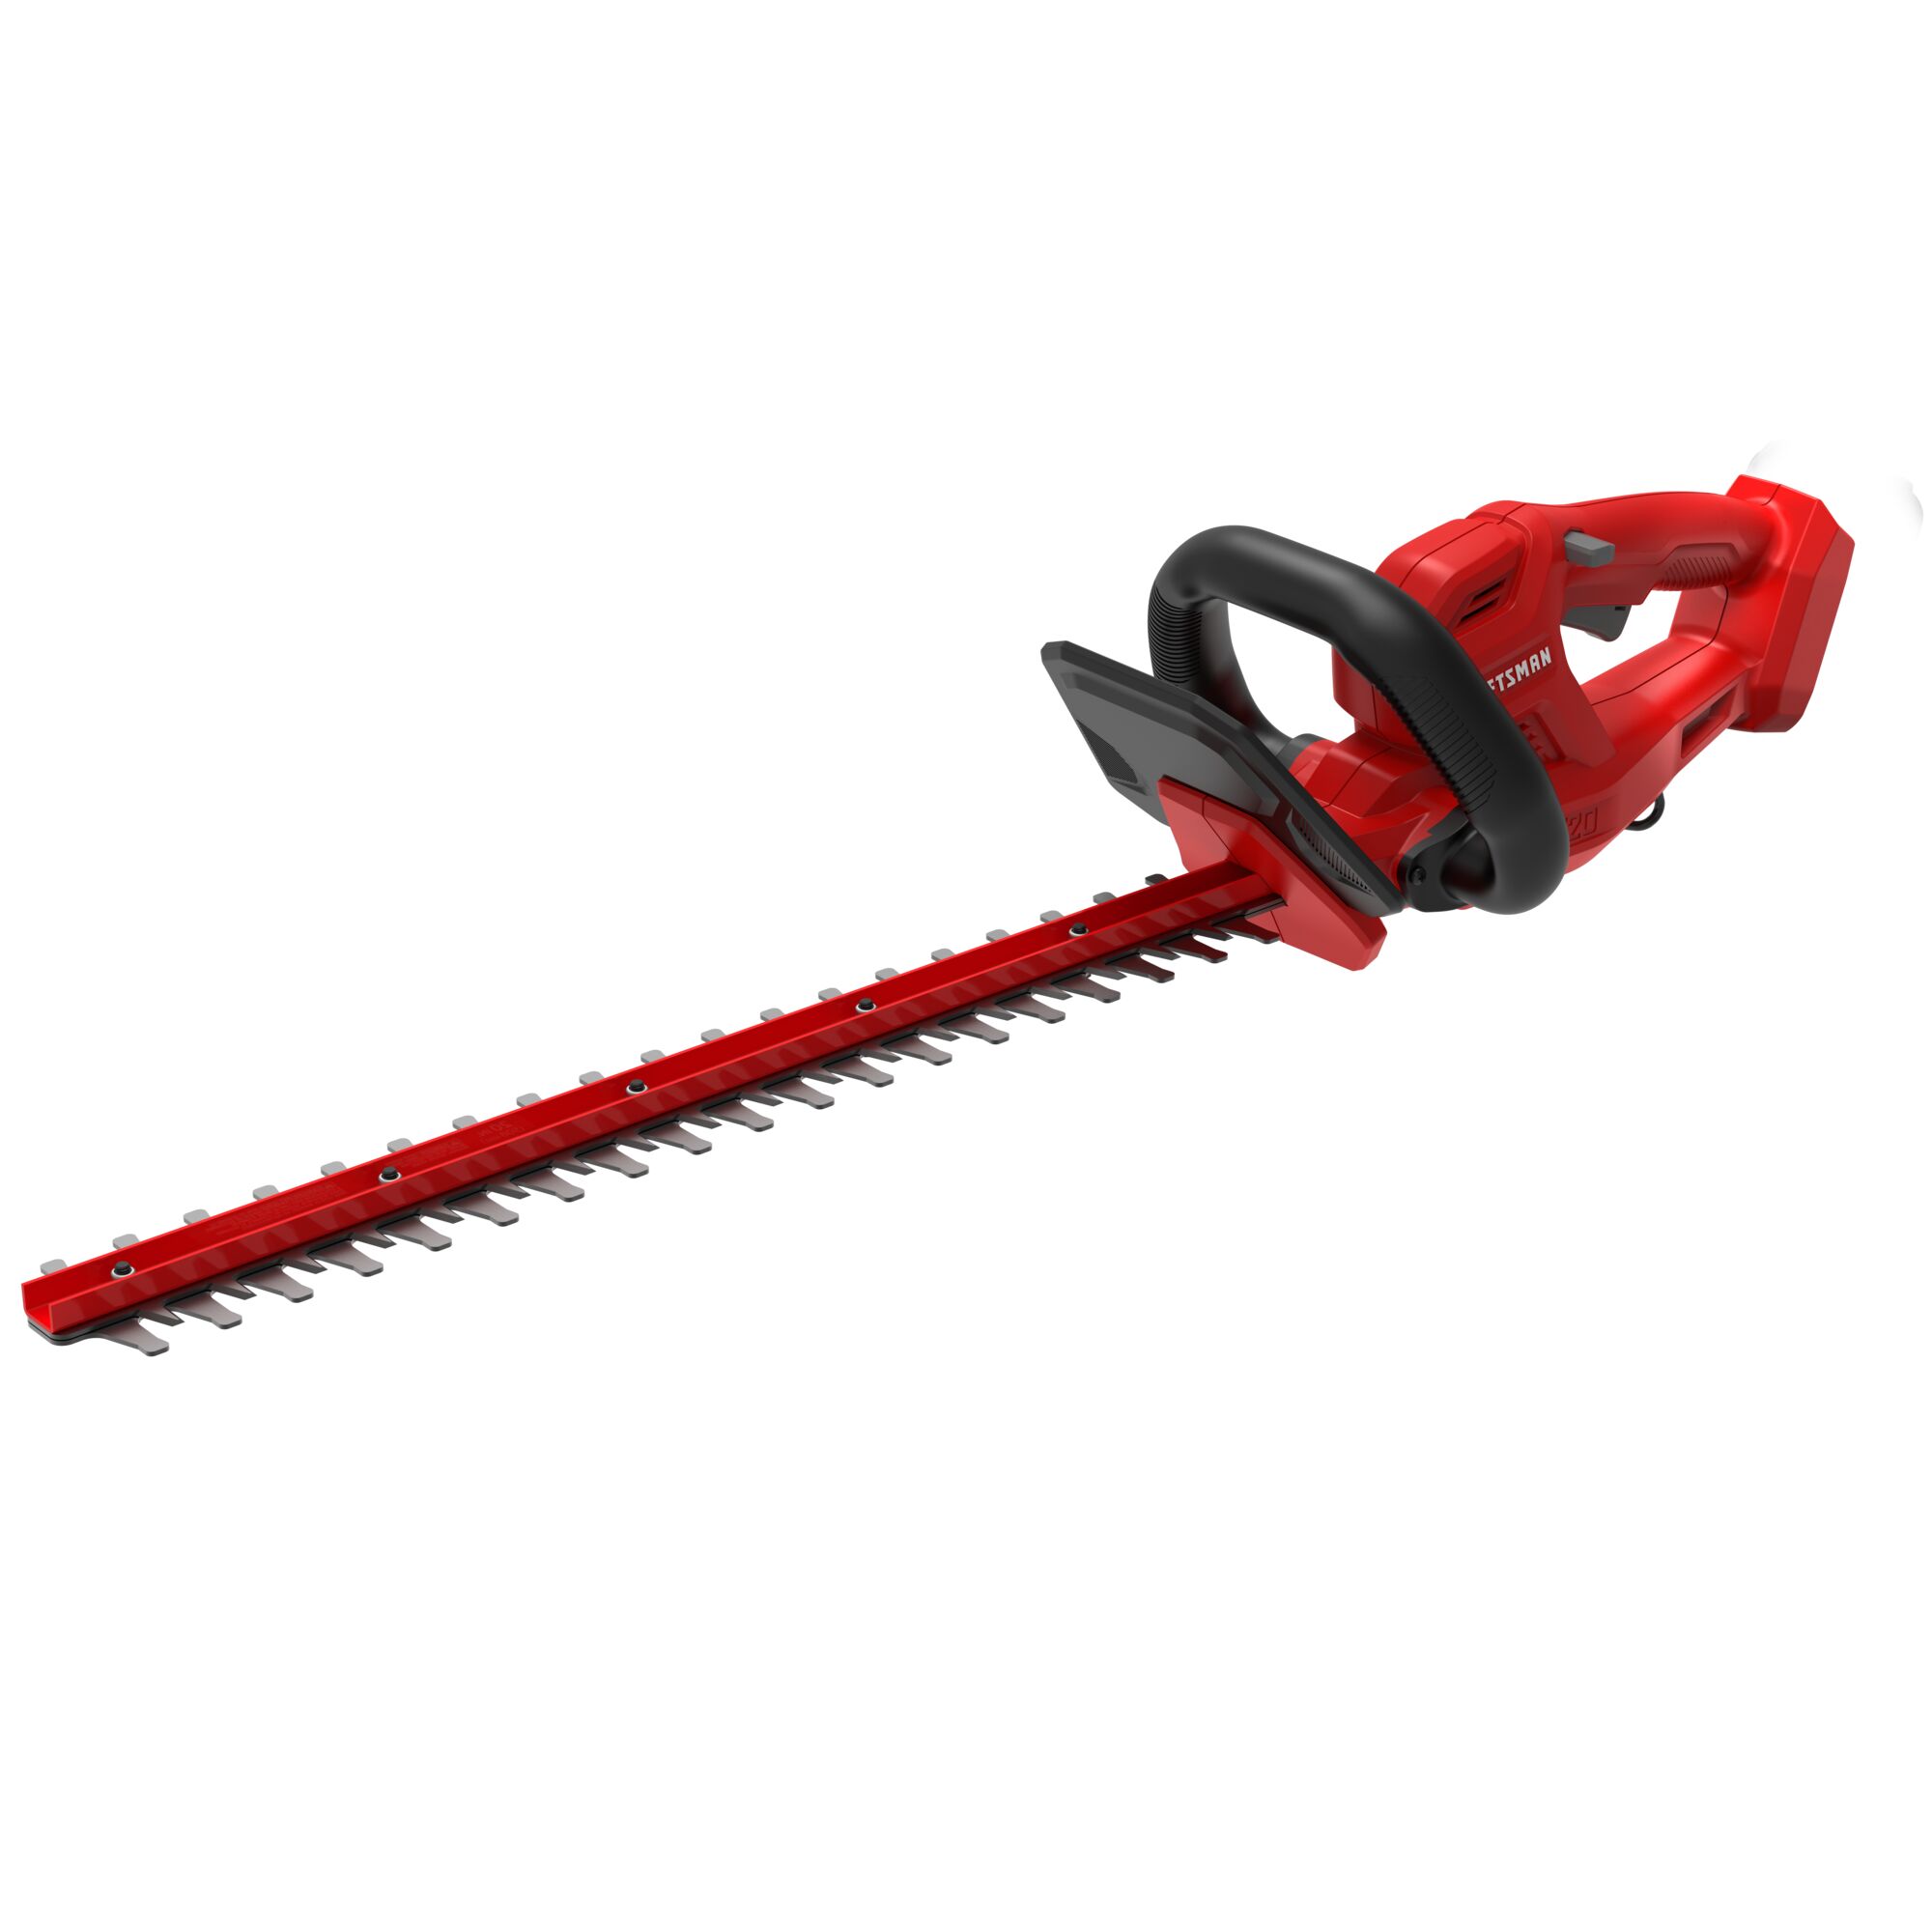 Cordless 20 inch hedge trimmer kit.